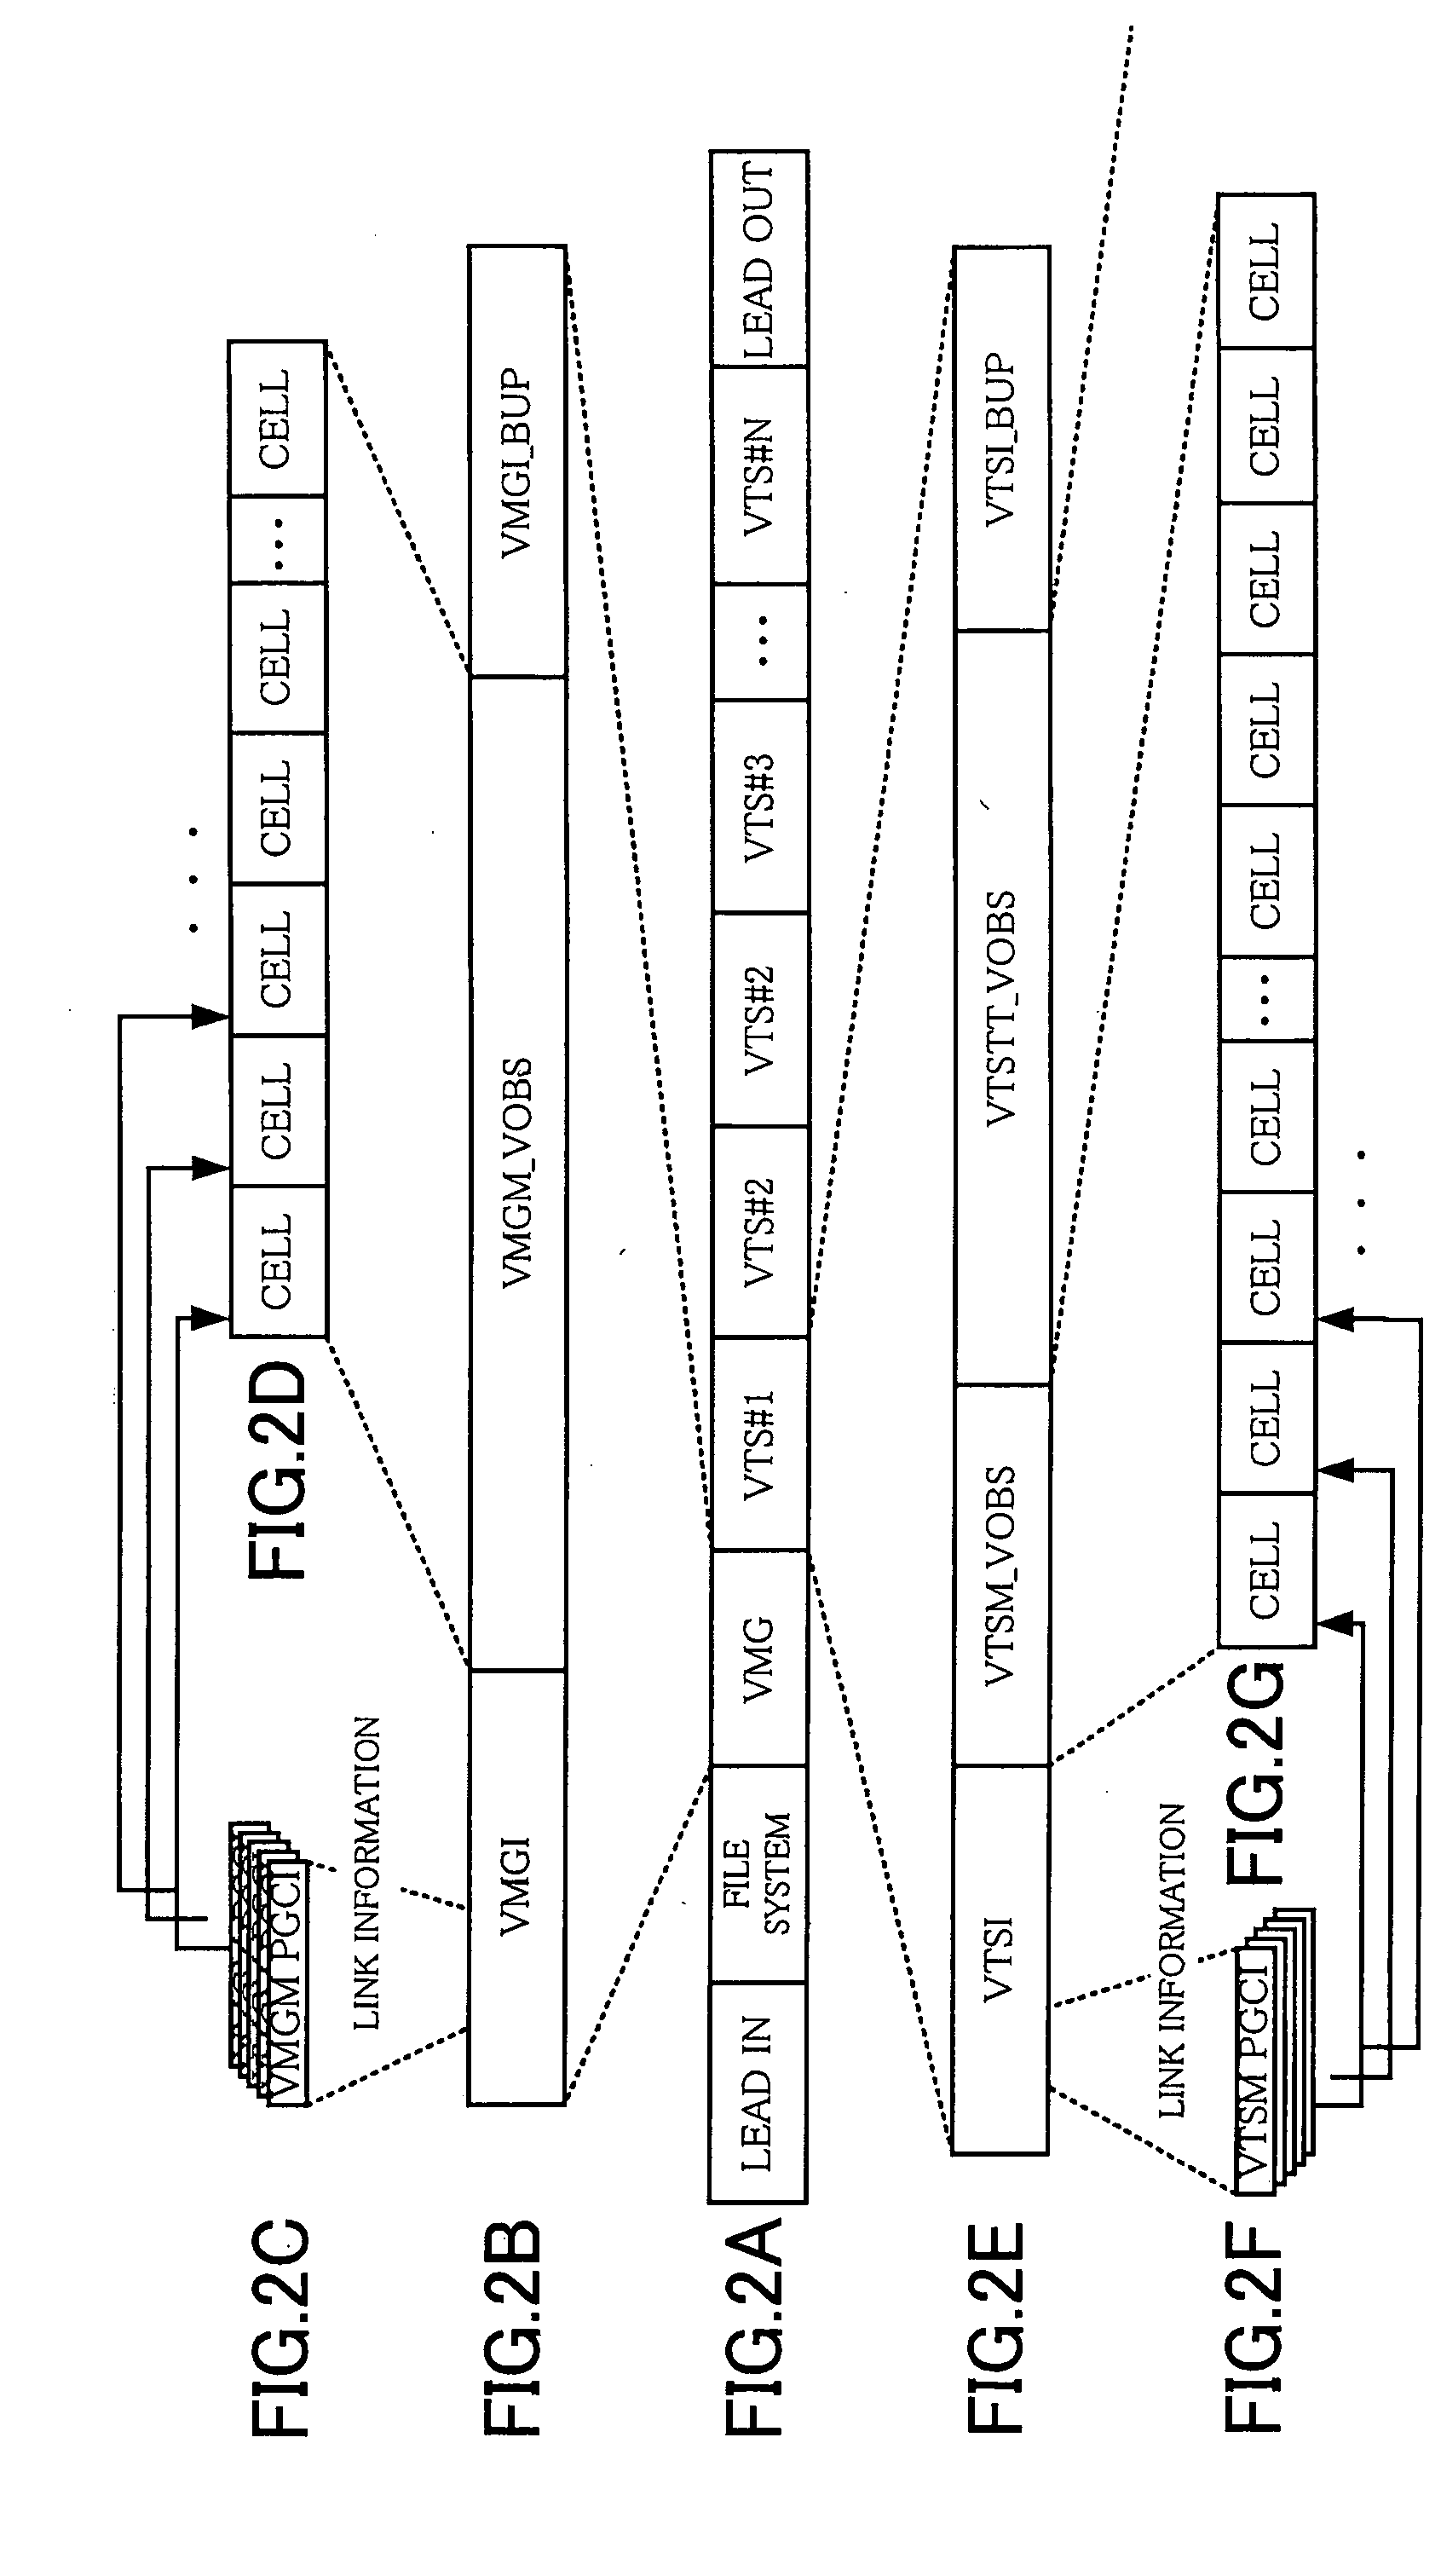 Optical recording method and optical recording device